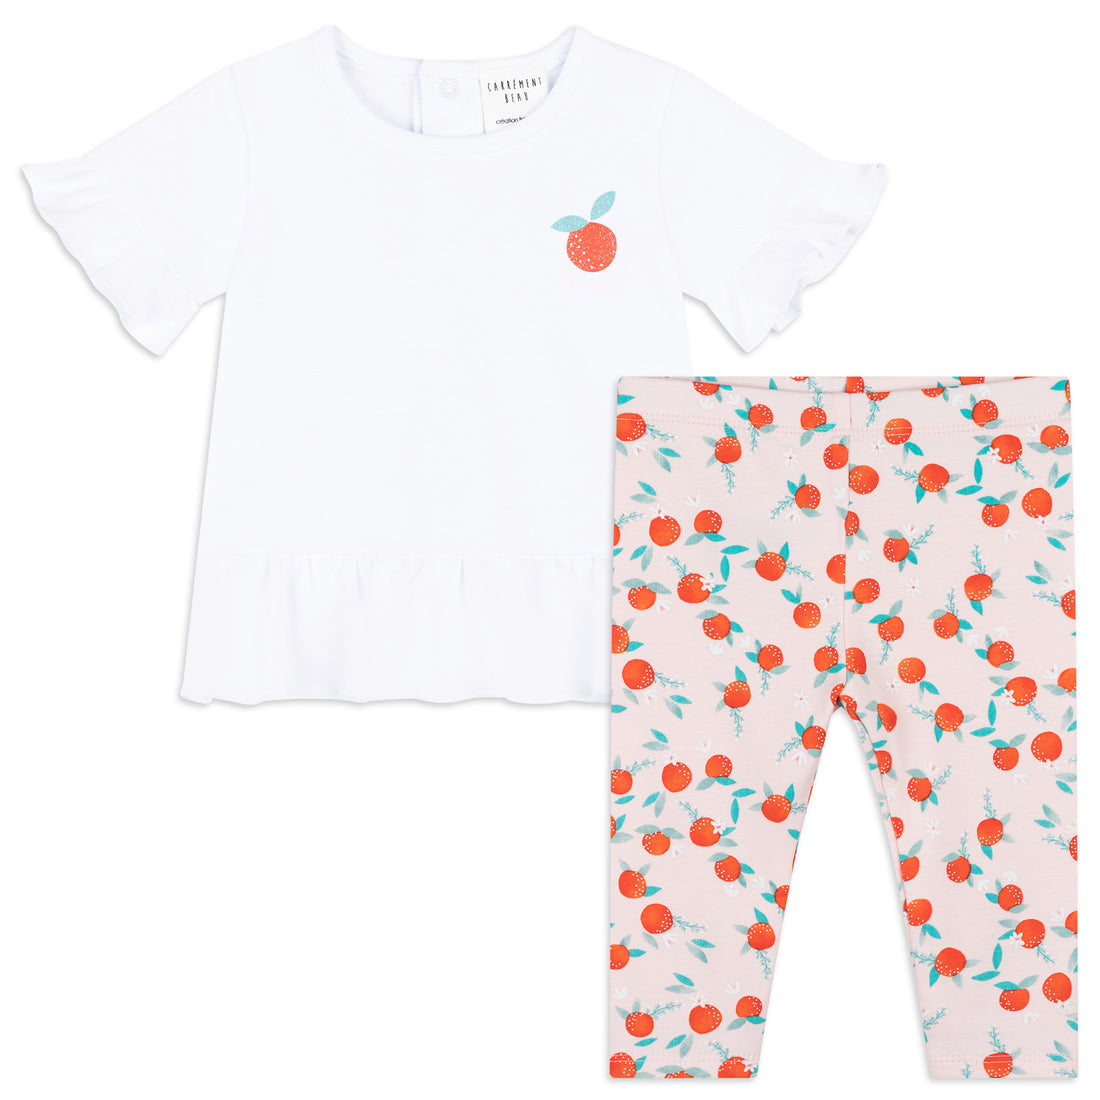 carrément-beau-t-shirt-spring-1-infant-pink-white-carr-s22-y08033-s01-6y- (1)